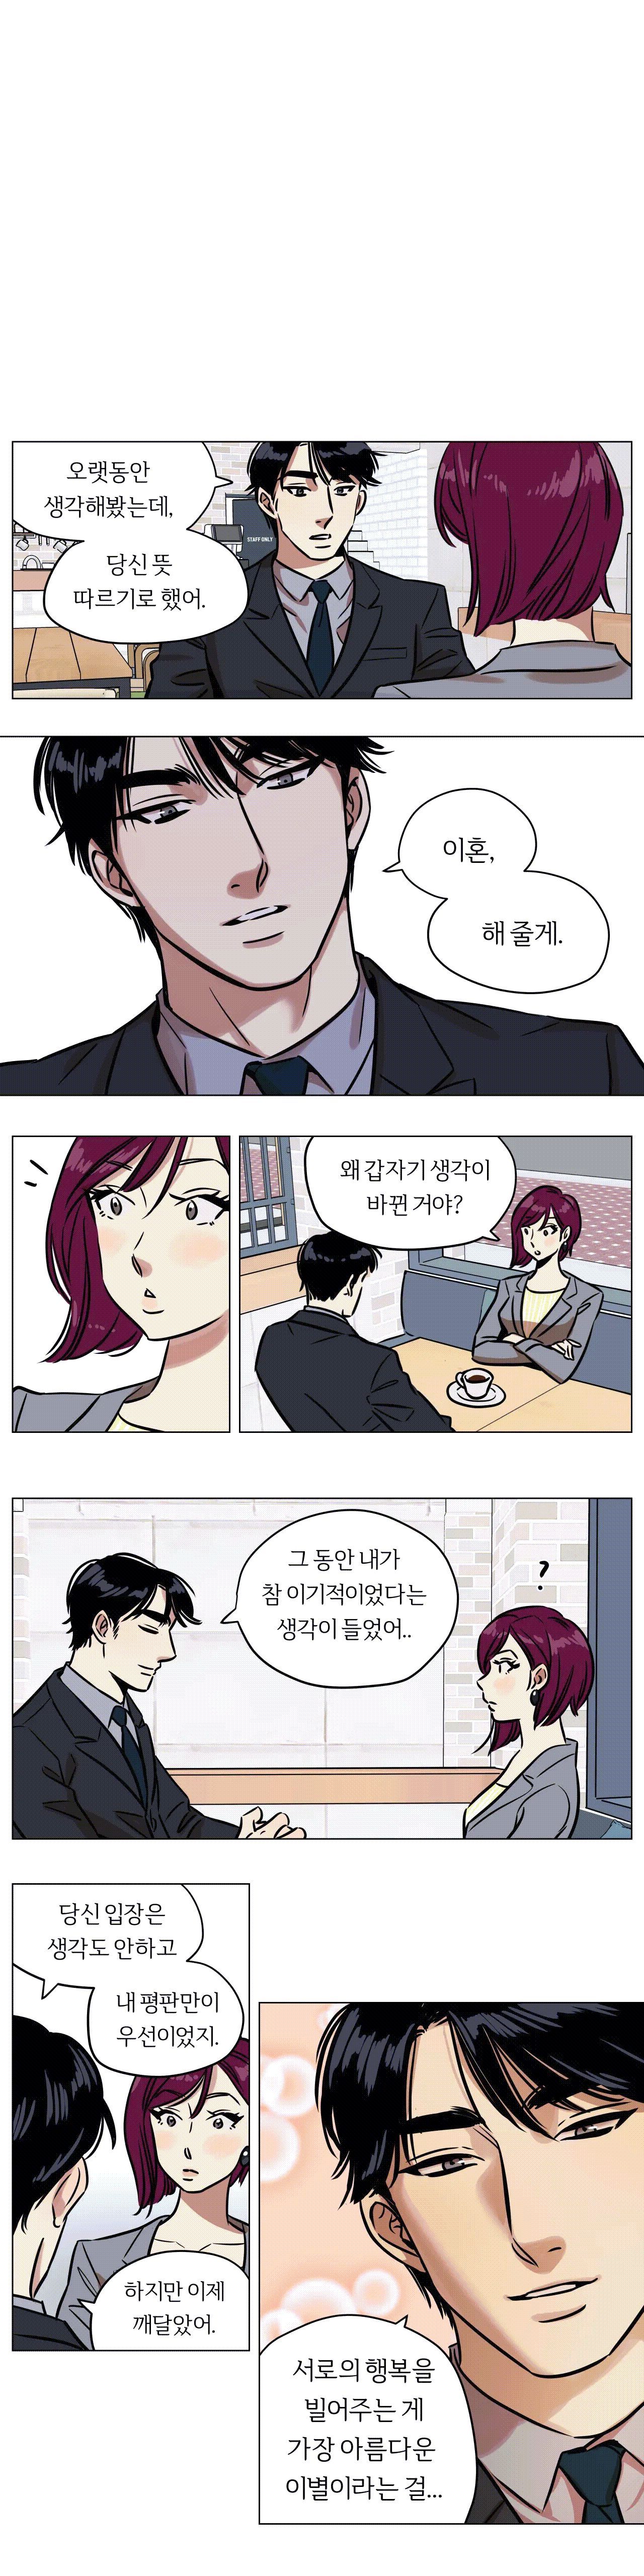 Snowman Raw - Chapter 5 Page 7